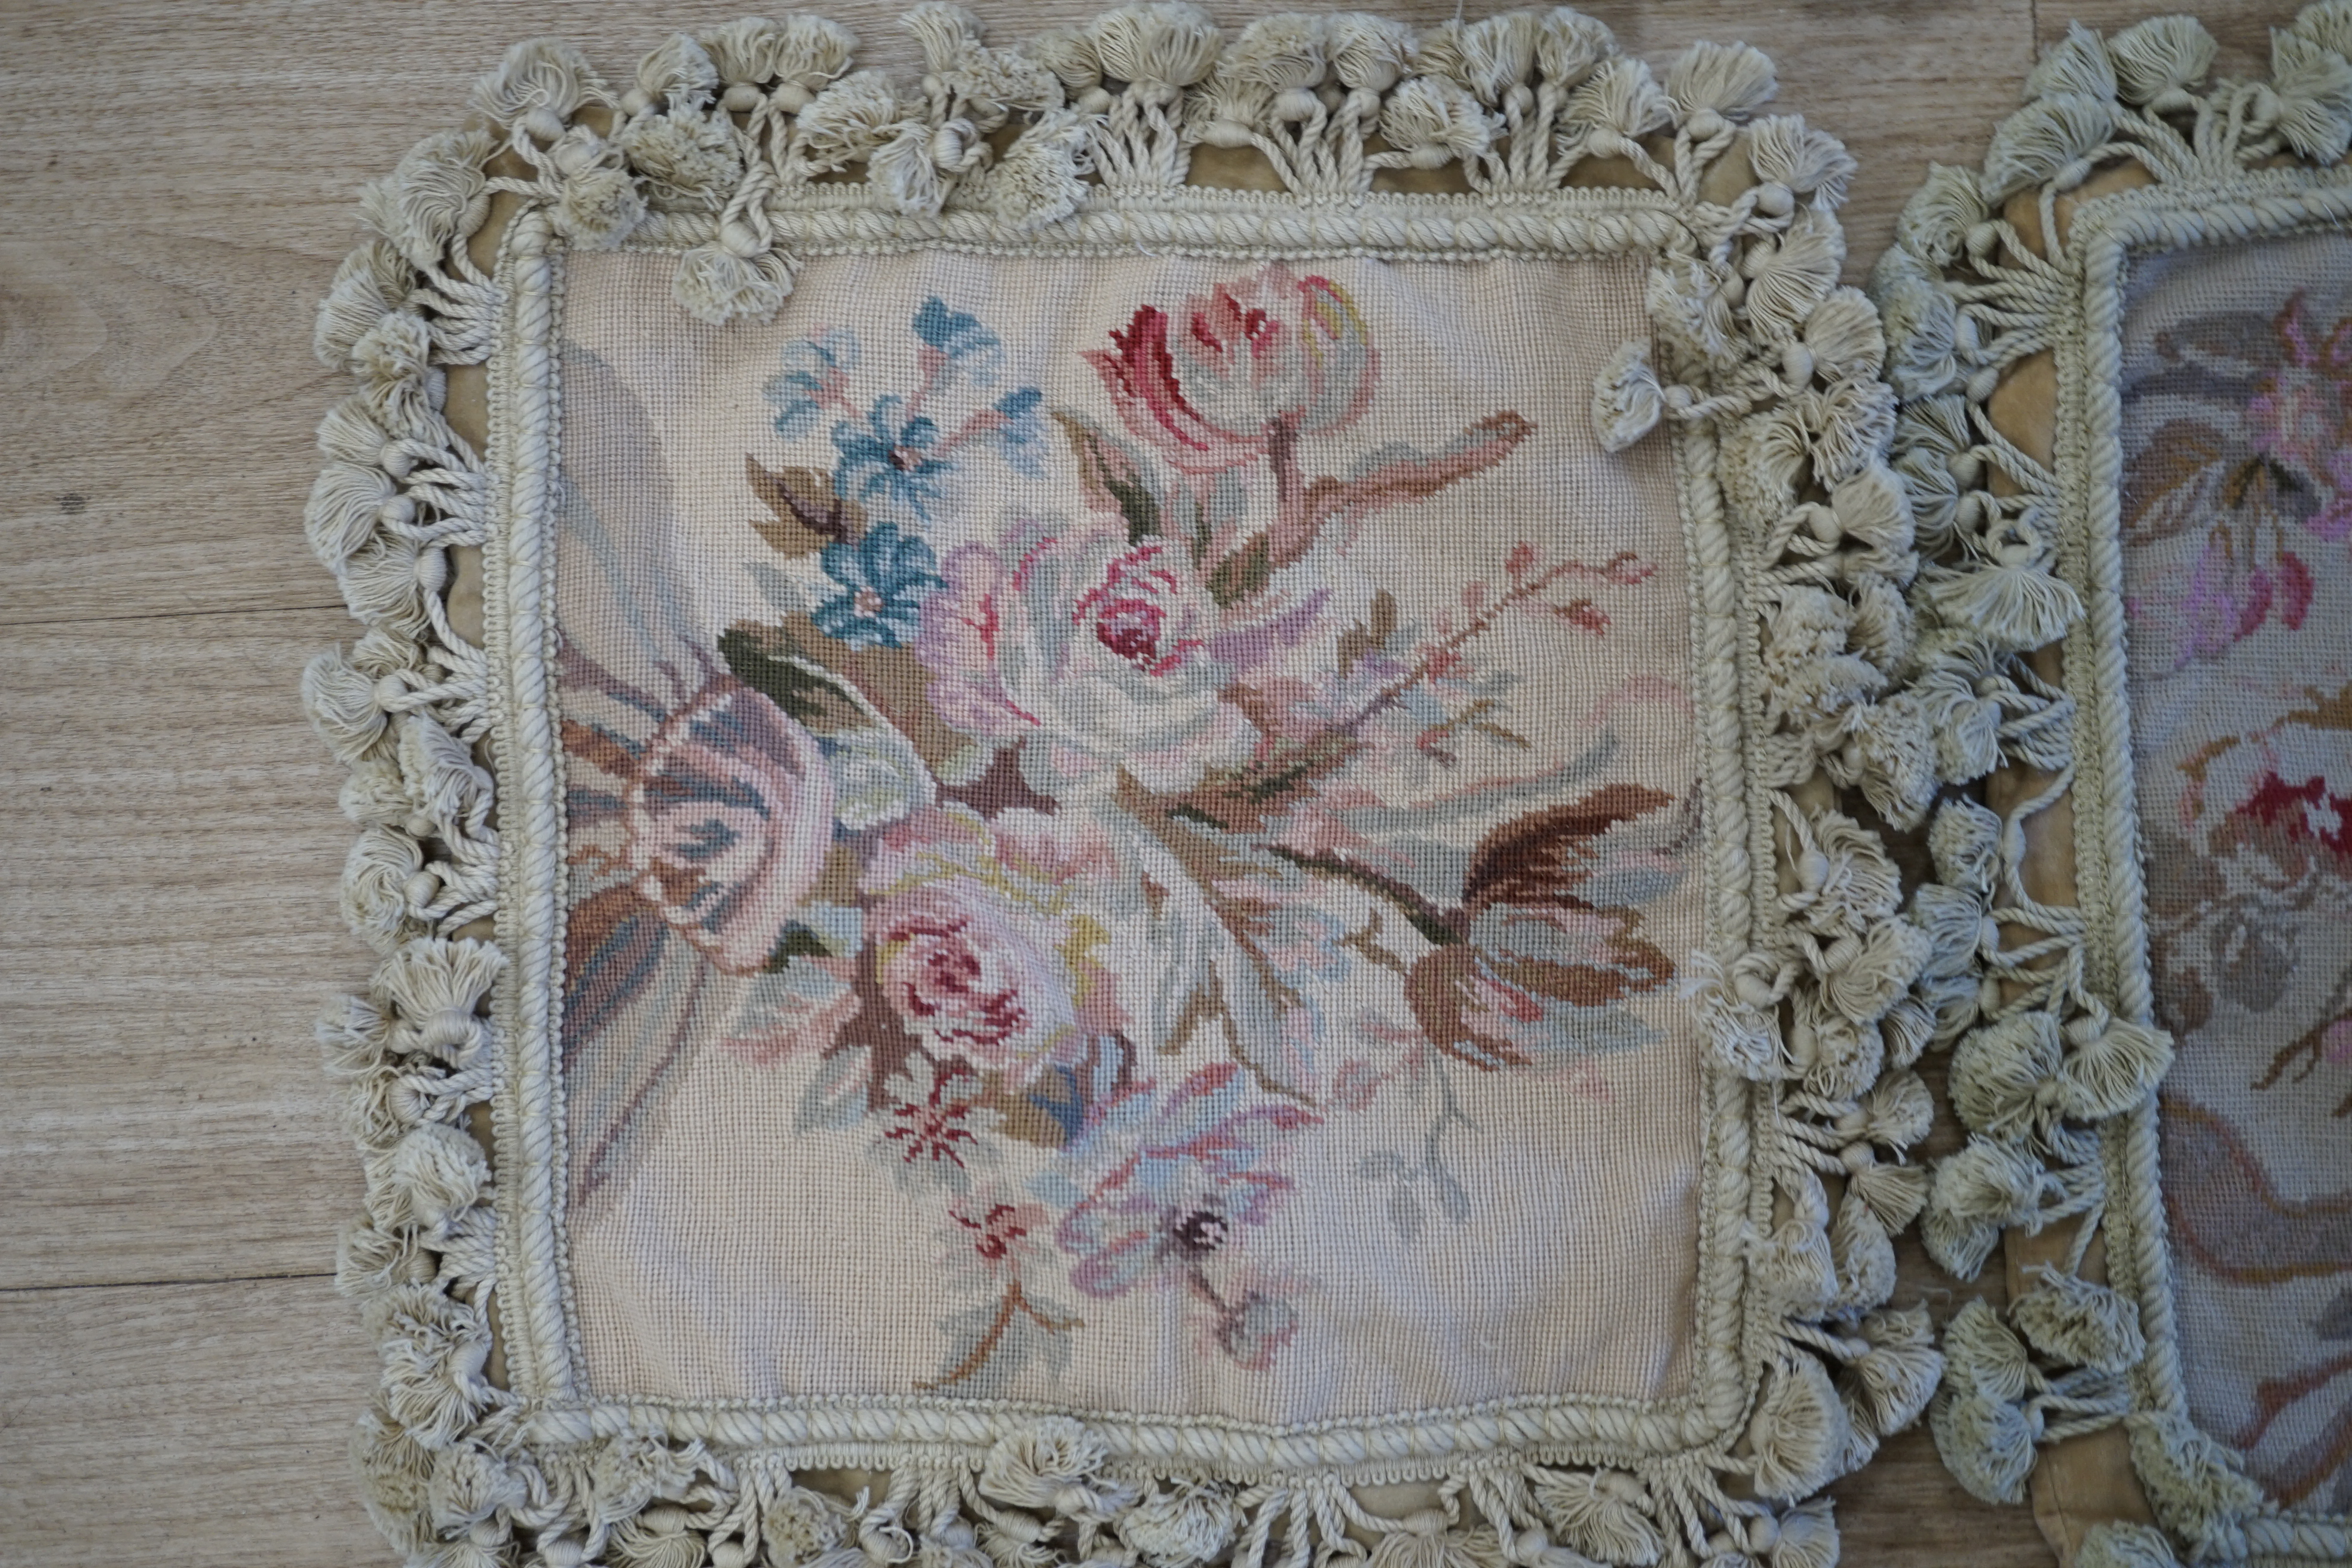 Three small square rose designed wool worked cushion covers and one similar larger cushion cover all with cotton tasselled edging, smaller covers 38cm square, larger cover 38cm x 48cm. Condition - good